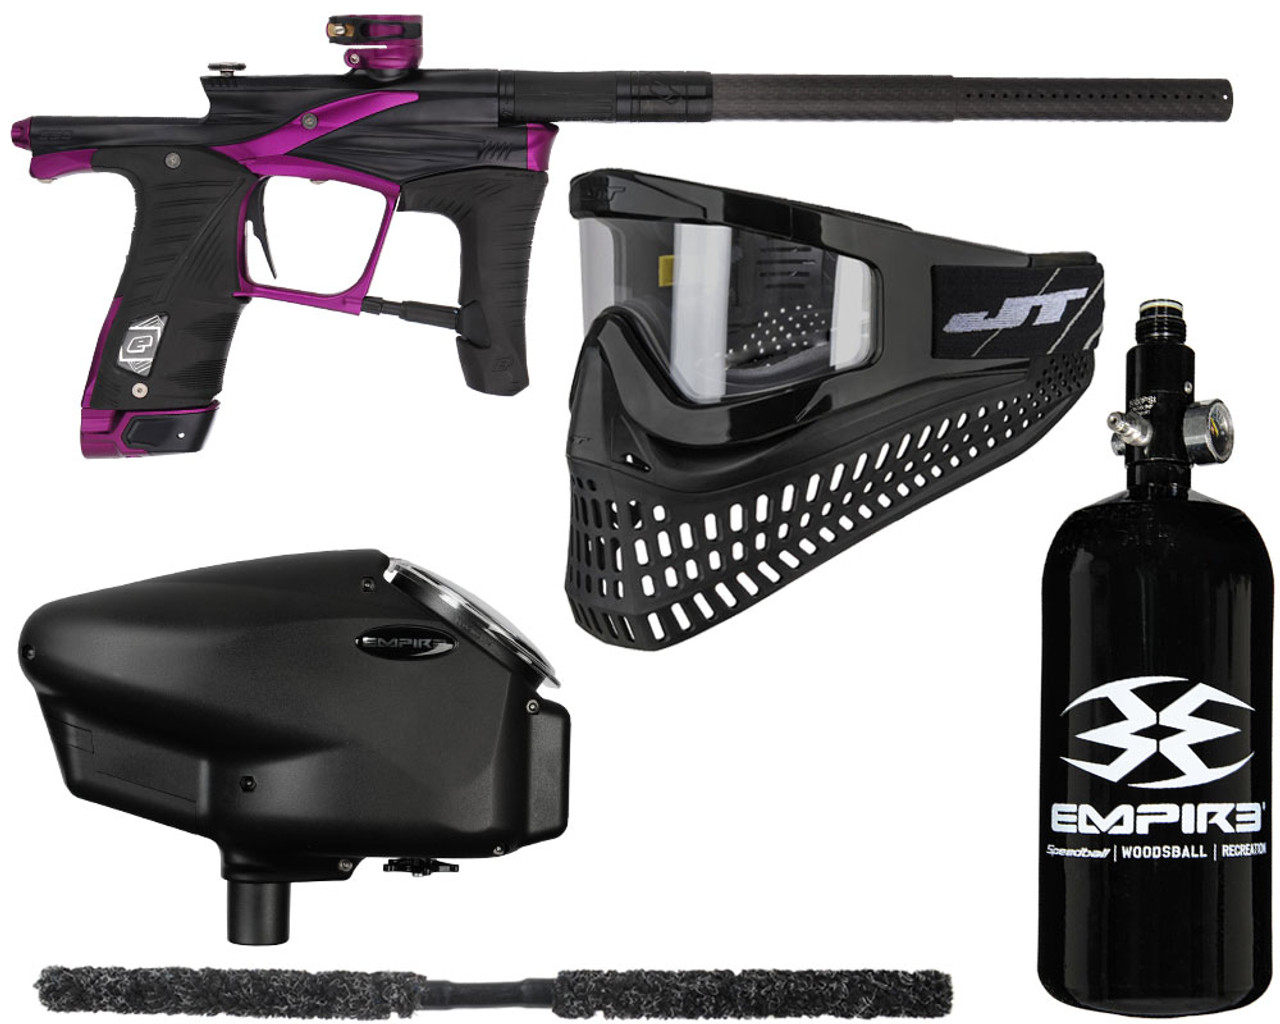 Planet Eclipse Ego LV1.6 Super Paintball Gun Package Kit